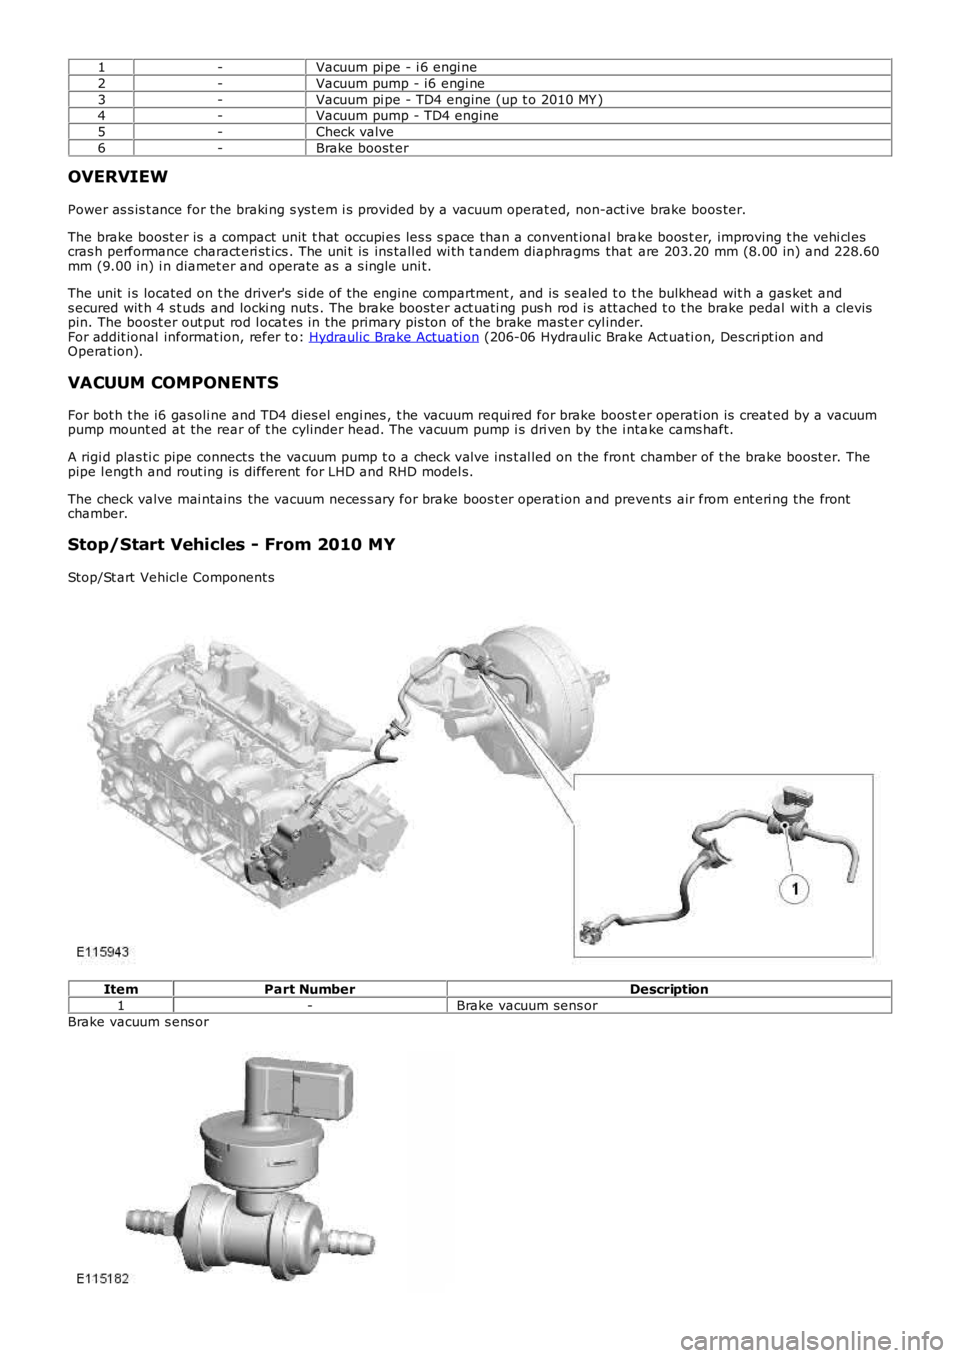 LAND ROVER FRELANDER 2 2006  Repair Manual 1-Vacuum pi pe - i 6 engi ne
2-Vacuum pump - i6 engi ne
3-Vacuum pi pe - TD4 engine (up t o 2010 MY )4-Vacuum pump - TD4 engine
5-Check valve
6-Brake boost er
OVERVIEW
Power as s is t ance for the bra